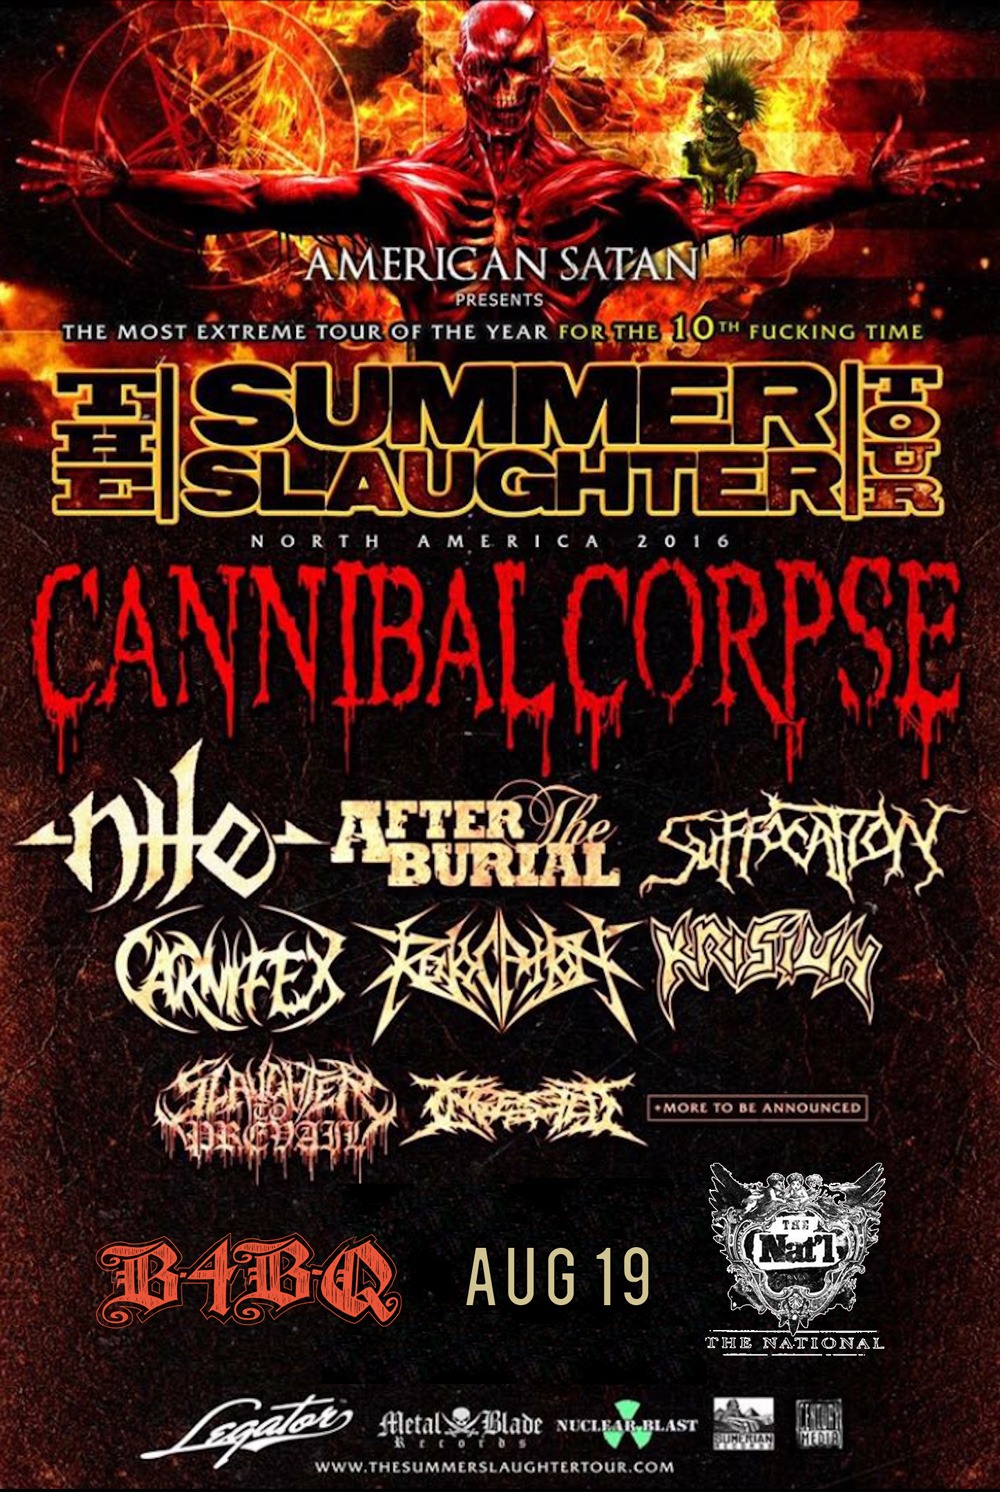 B4BQ Lineup Assaults RVA! Pre-GWAR B-Q show features Cannibal Corpse, Nile, After the Burial